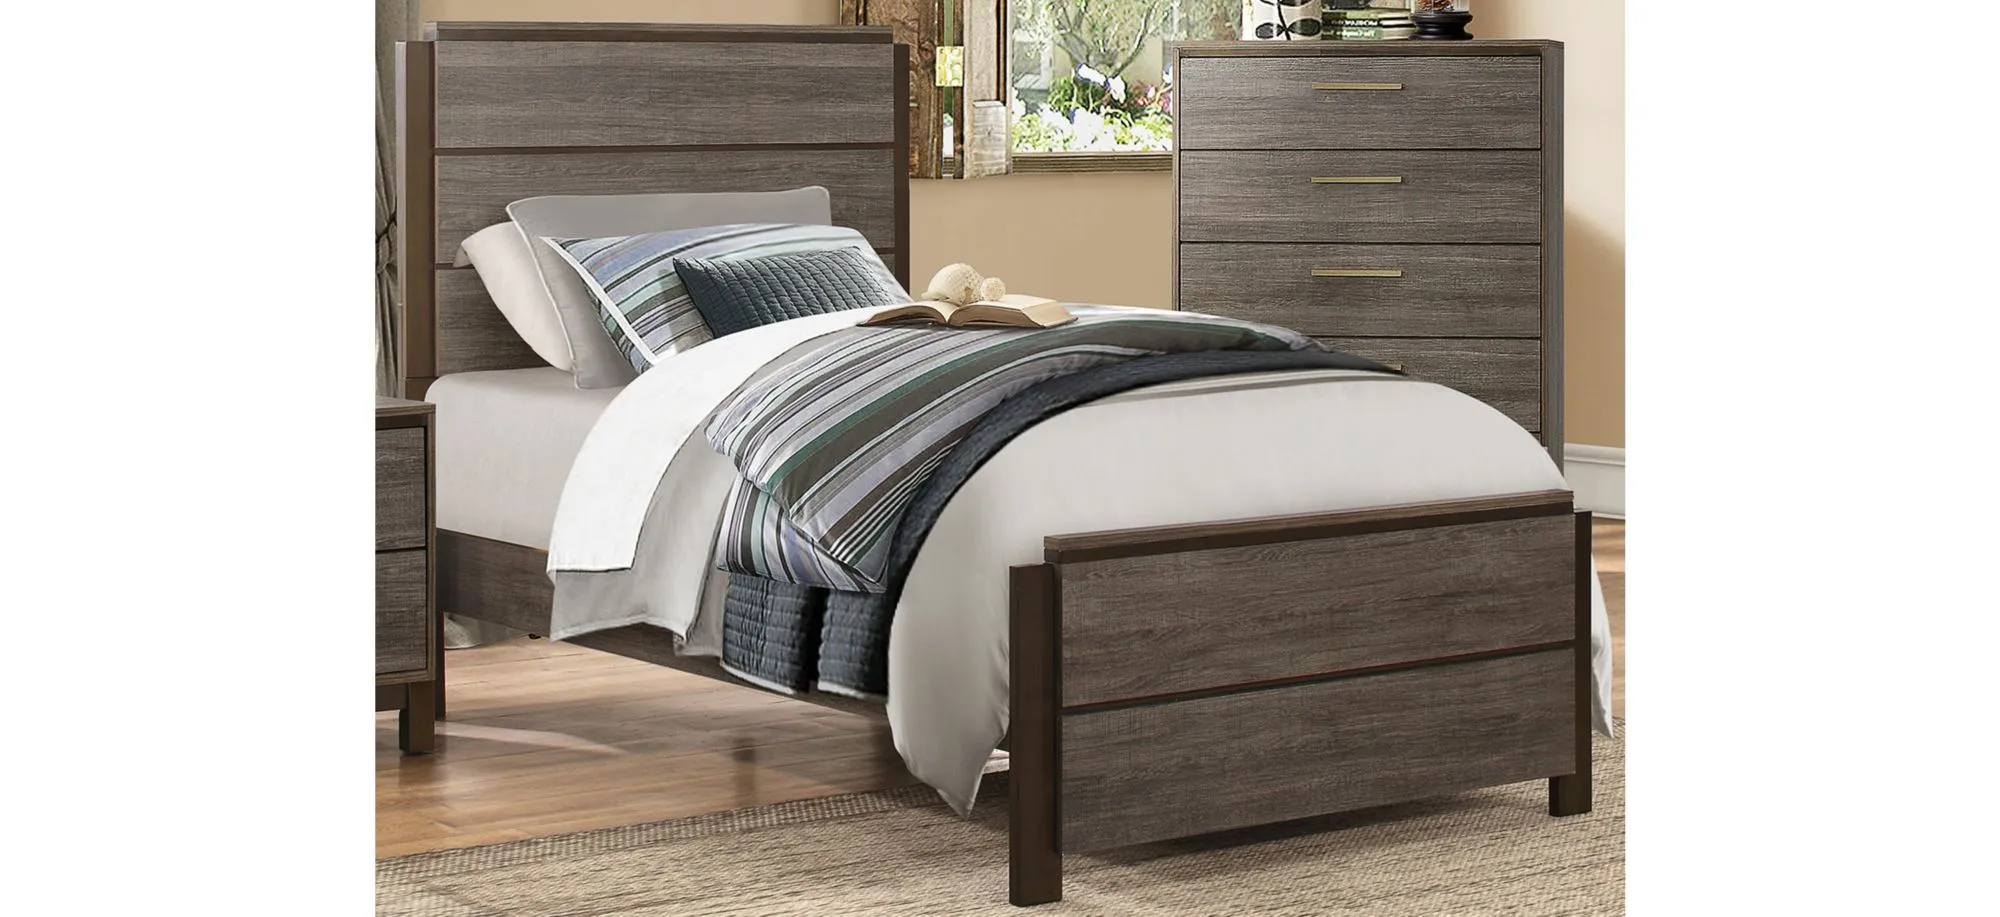 Solace Bed in Antique gray and dark brown by Homelegance